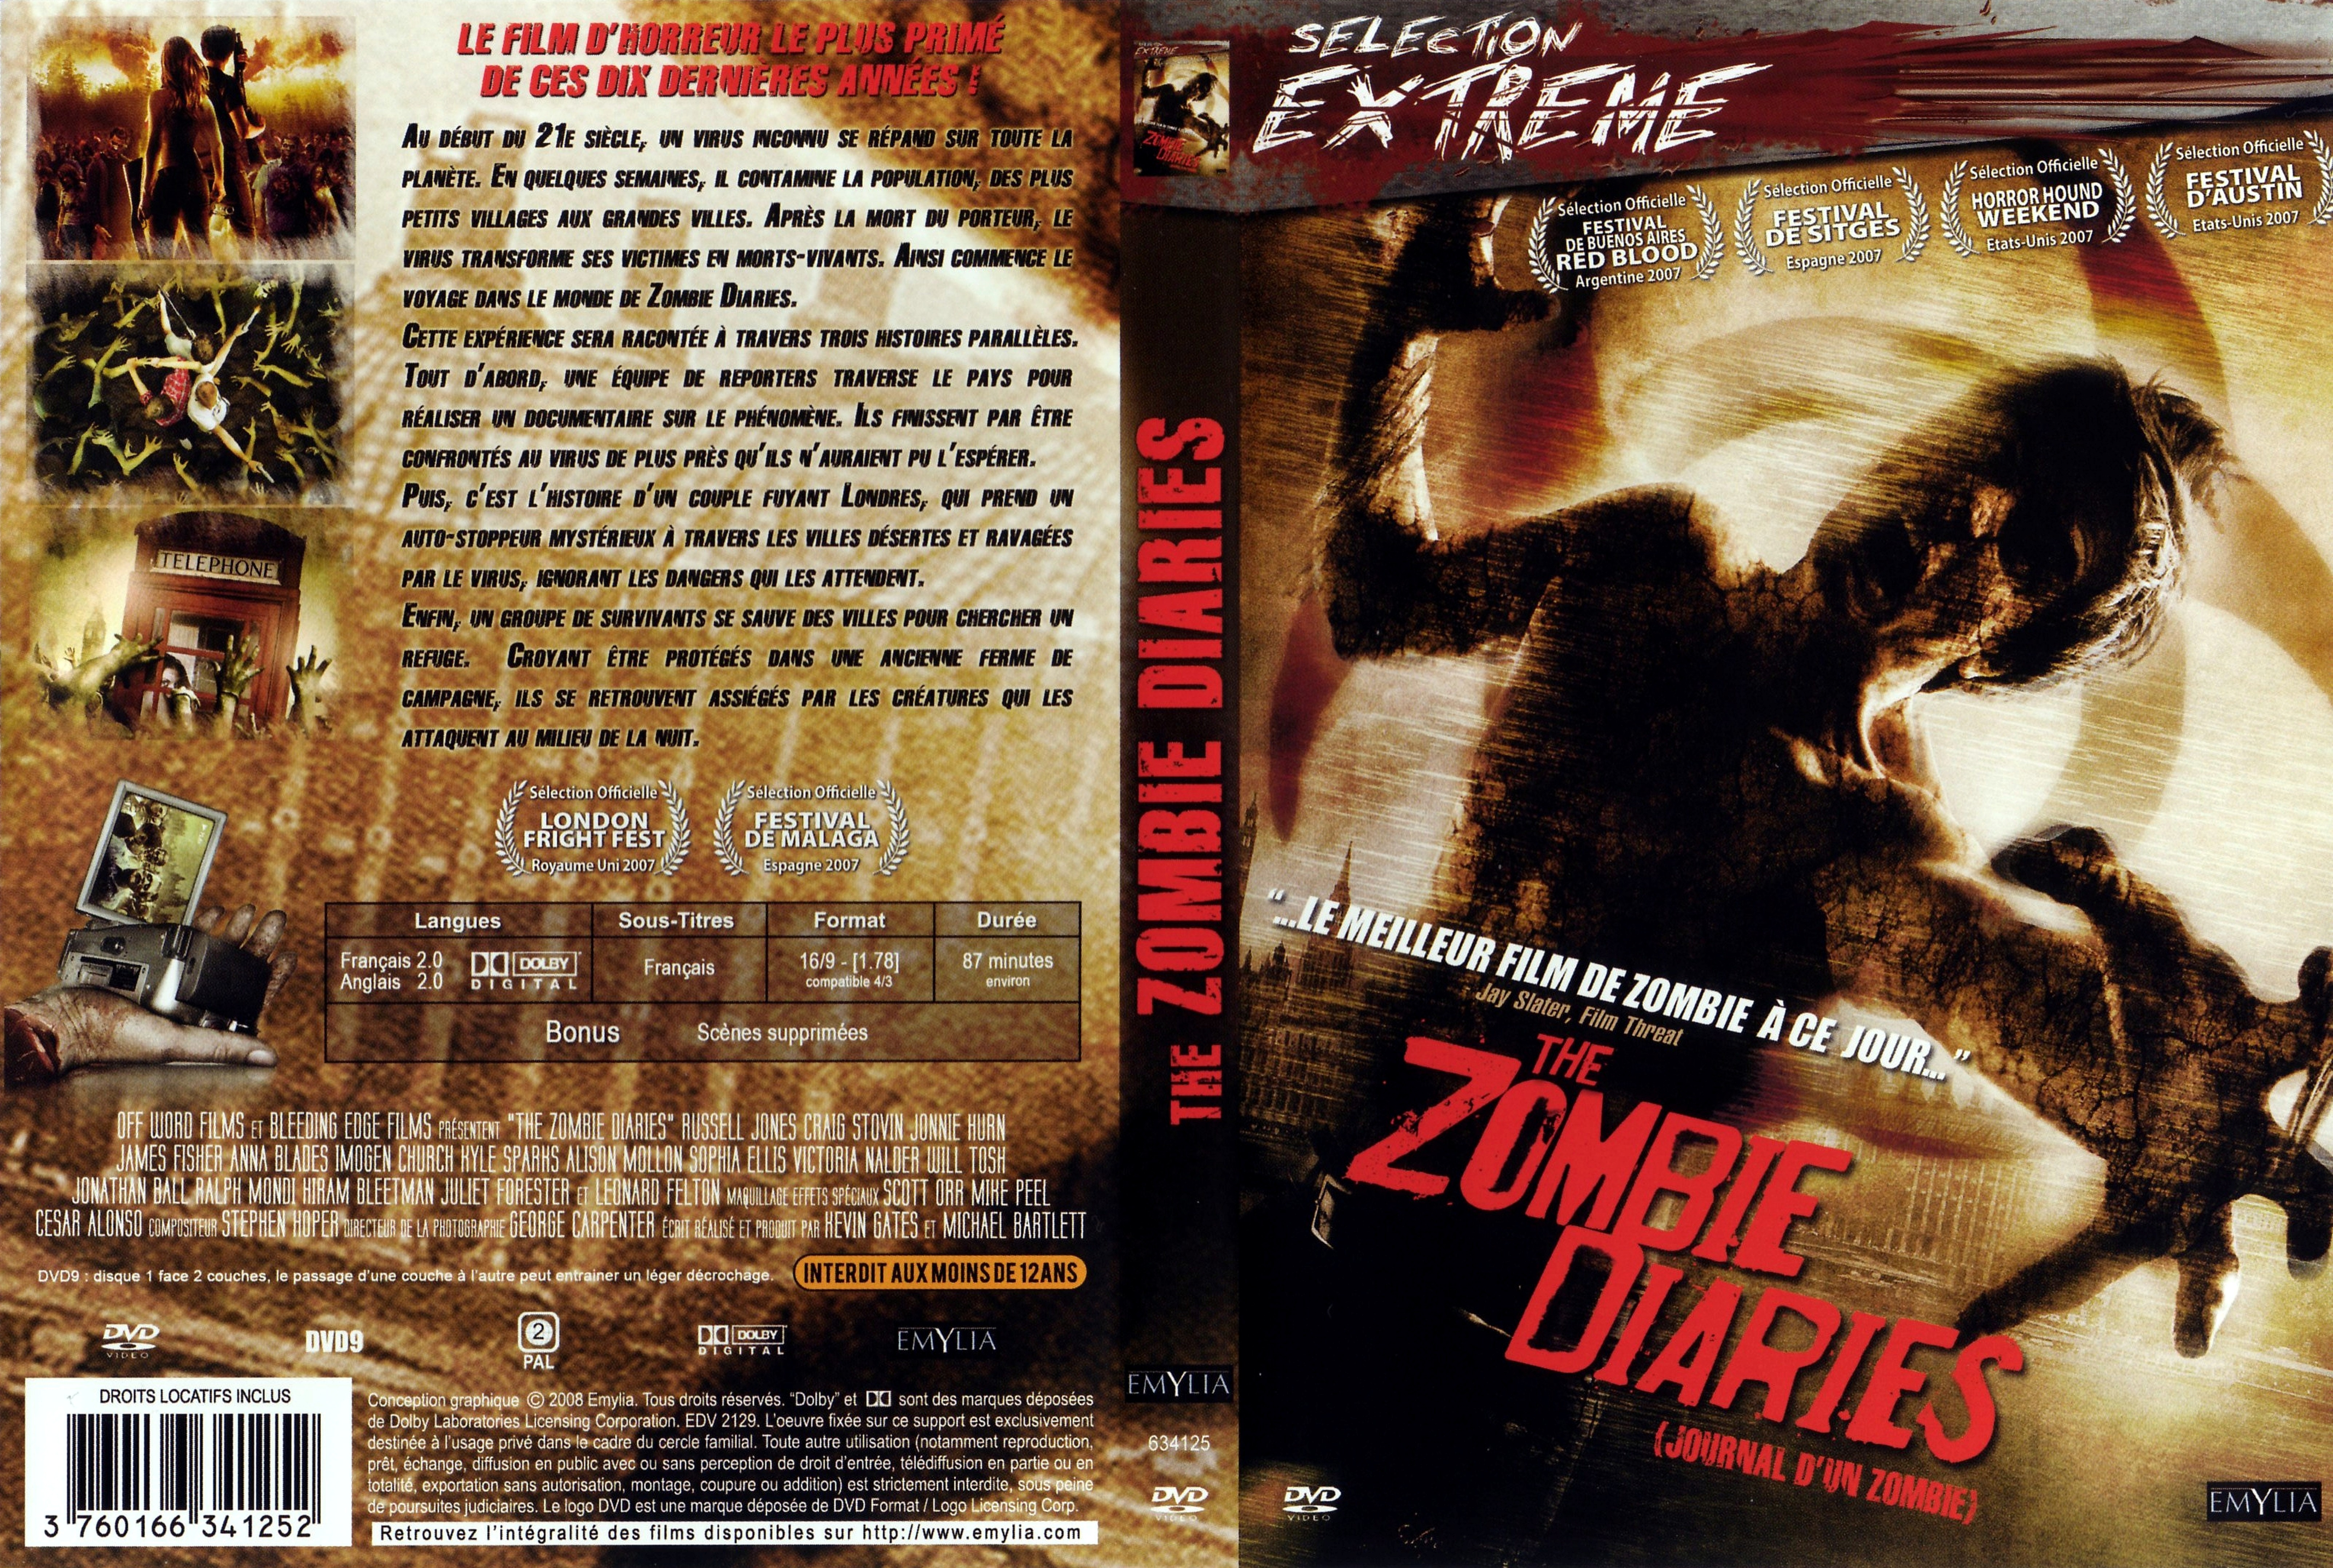 Jaquette DVD The zombie diaries